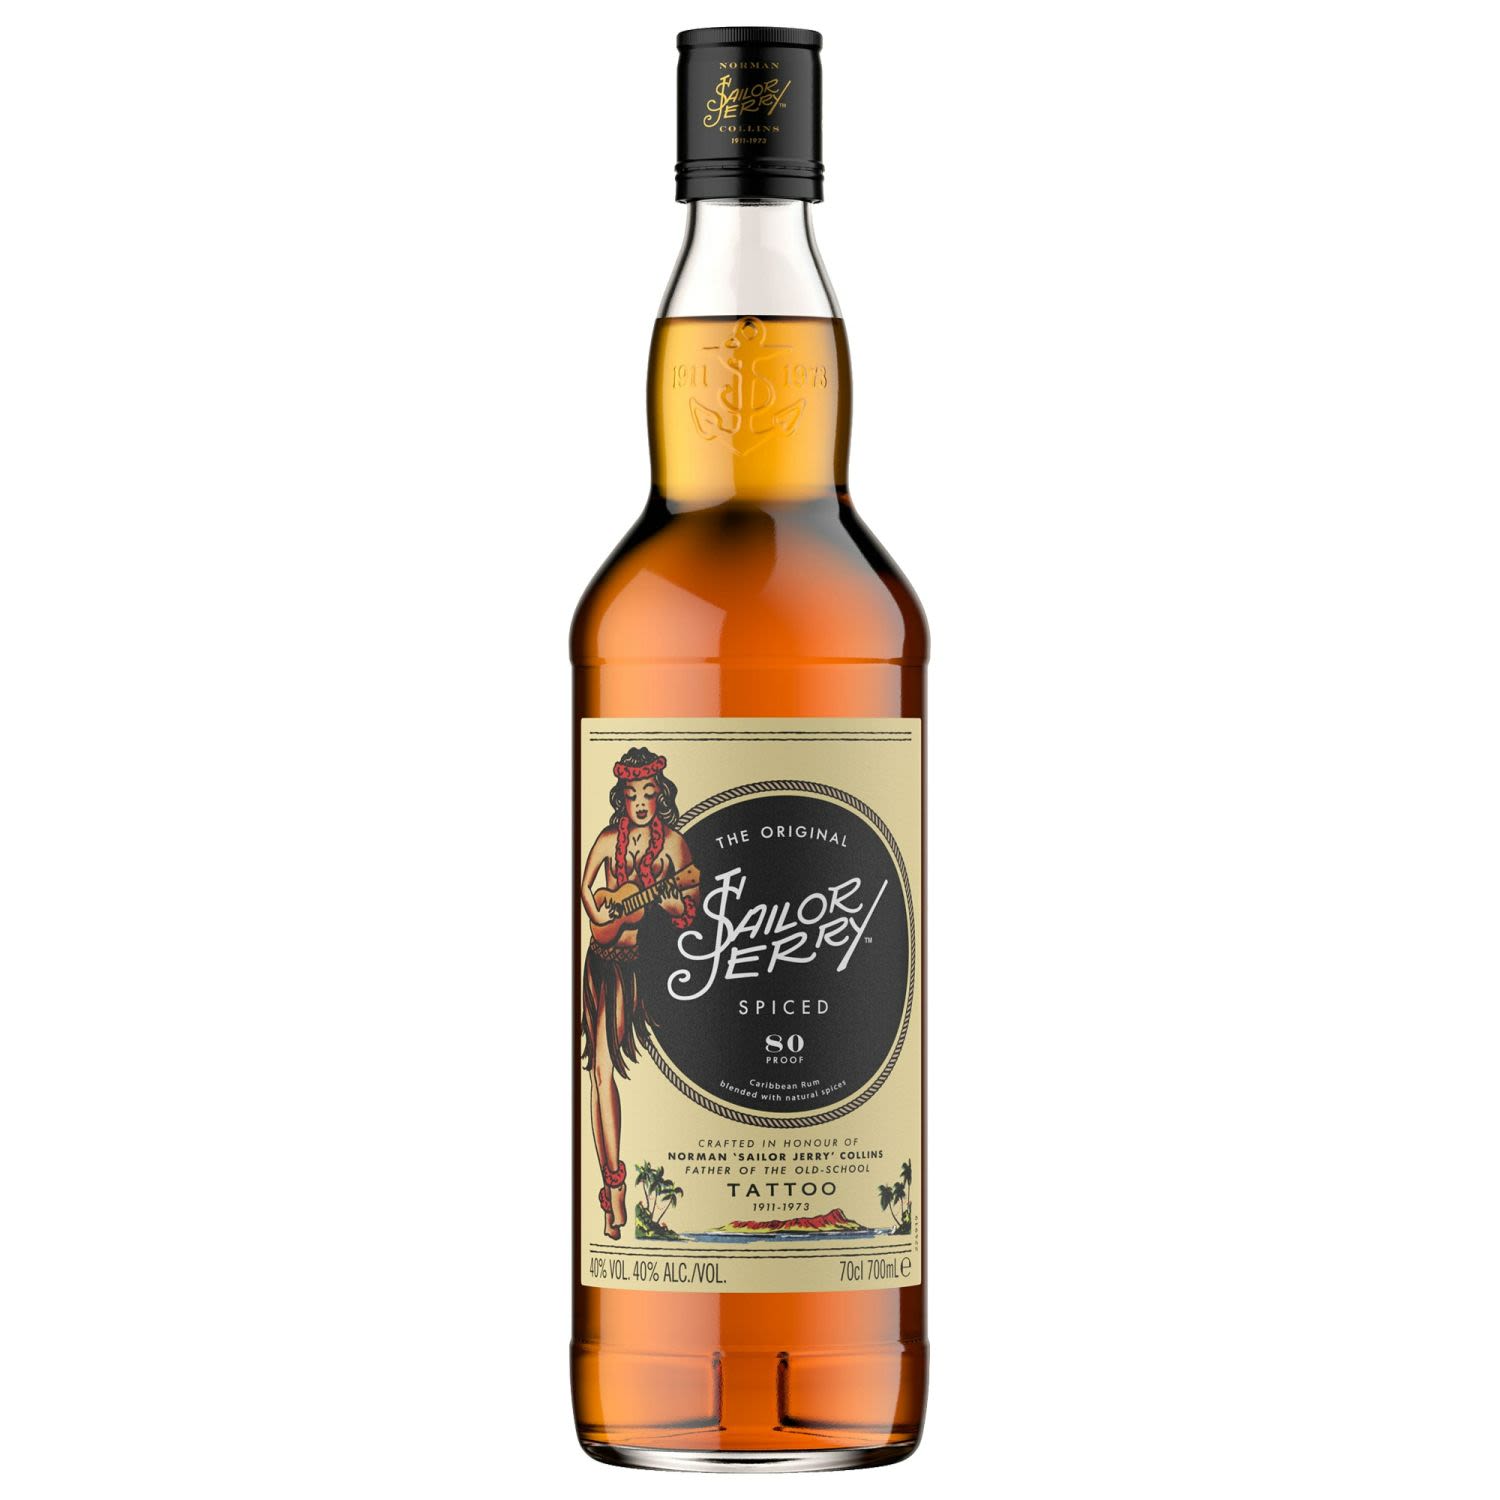 Norman 'Sailor Jerry' Collins was the father of old school tattooing and was a master craftsman whose artistry and integrity remain as timeless as the liquid that bears his signature. Sailor Jerry Caribbean Rum is blended with local natural spices, namely Vanilla and Lime. Most definitely a rum that is "strong, but goes down smooth."<br /> <br />Alcohol Volume: 40.00%<br /><br />Pack Format: Bottle<br /><br />Standard Drinks: 22<br /><br />Pack Type: Bottle<br /><br />Country of Origin: USA<br /><br />Region: Caribbean<br />